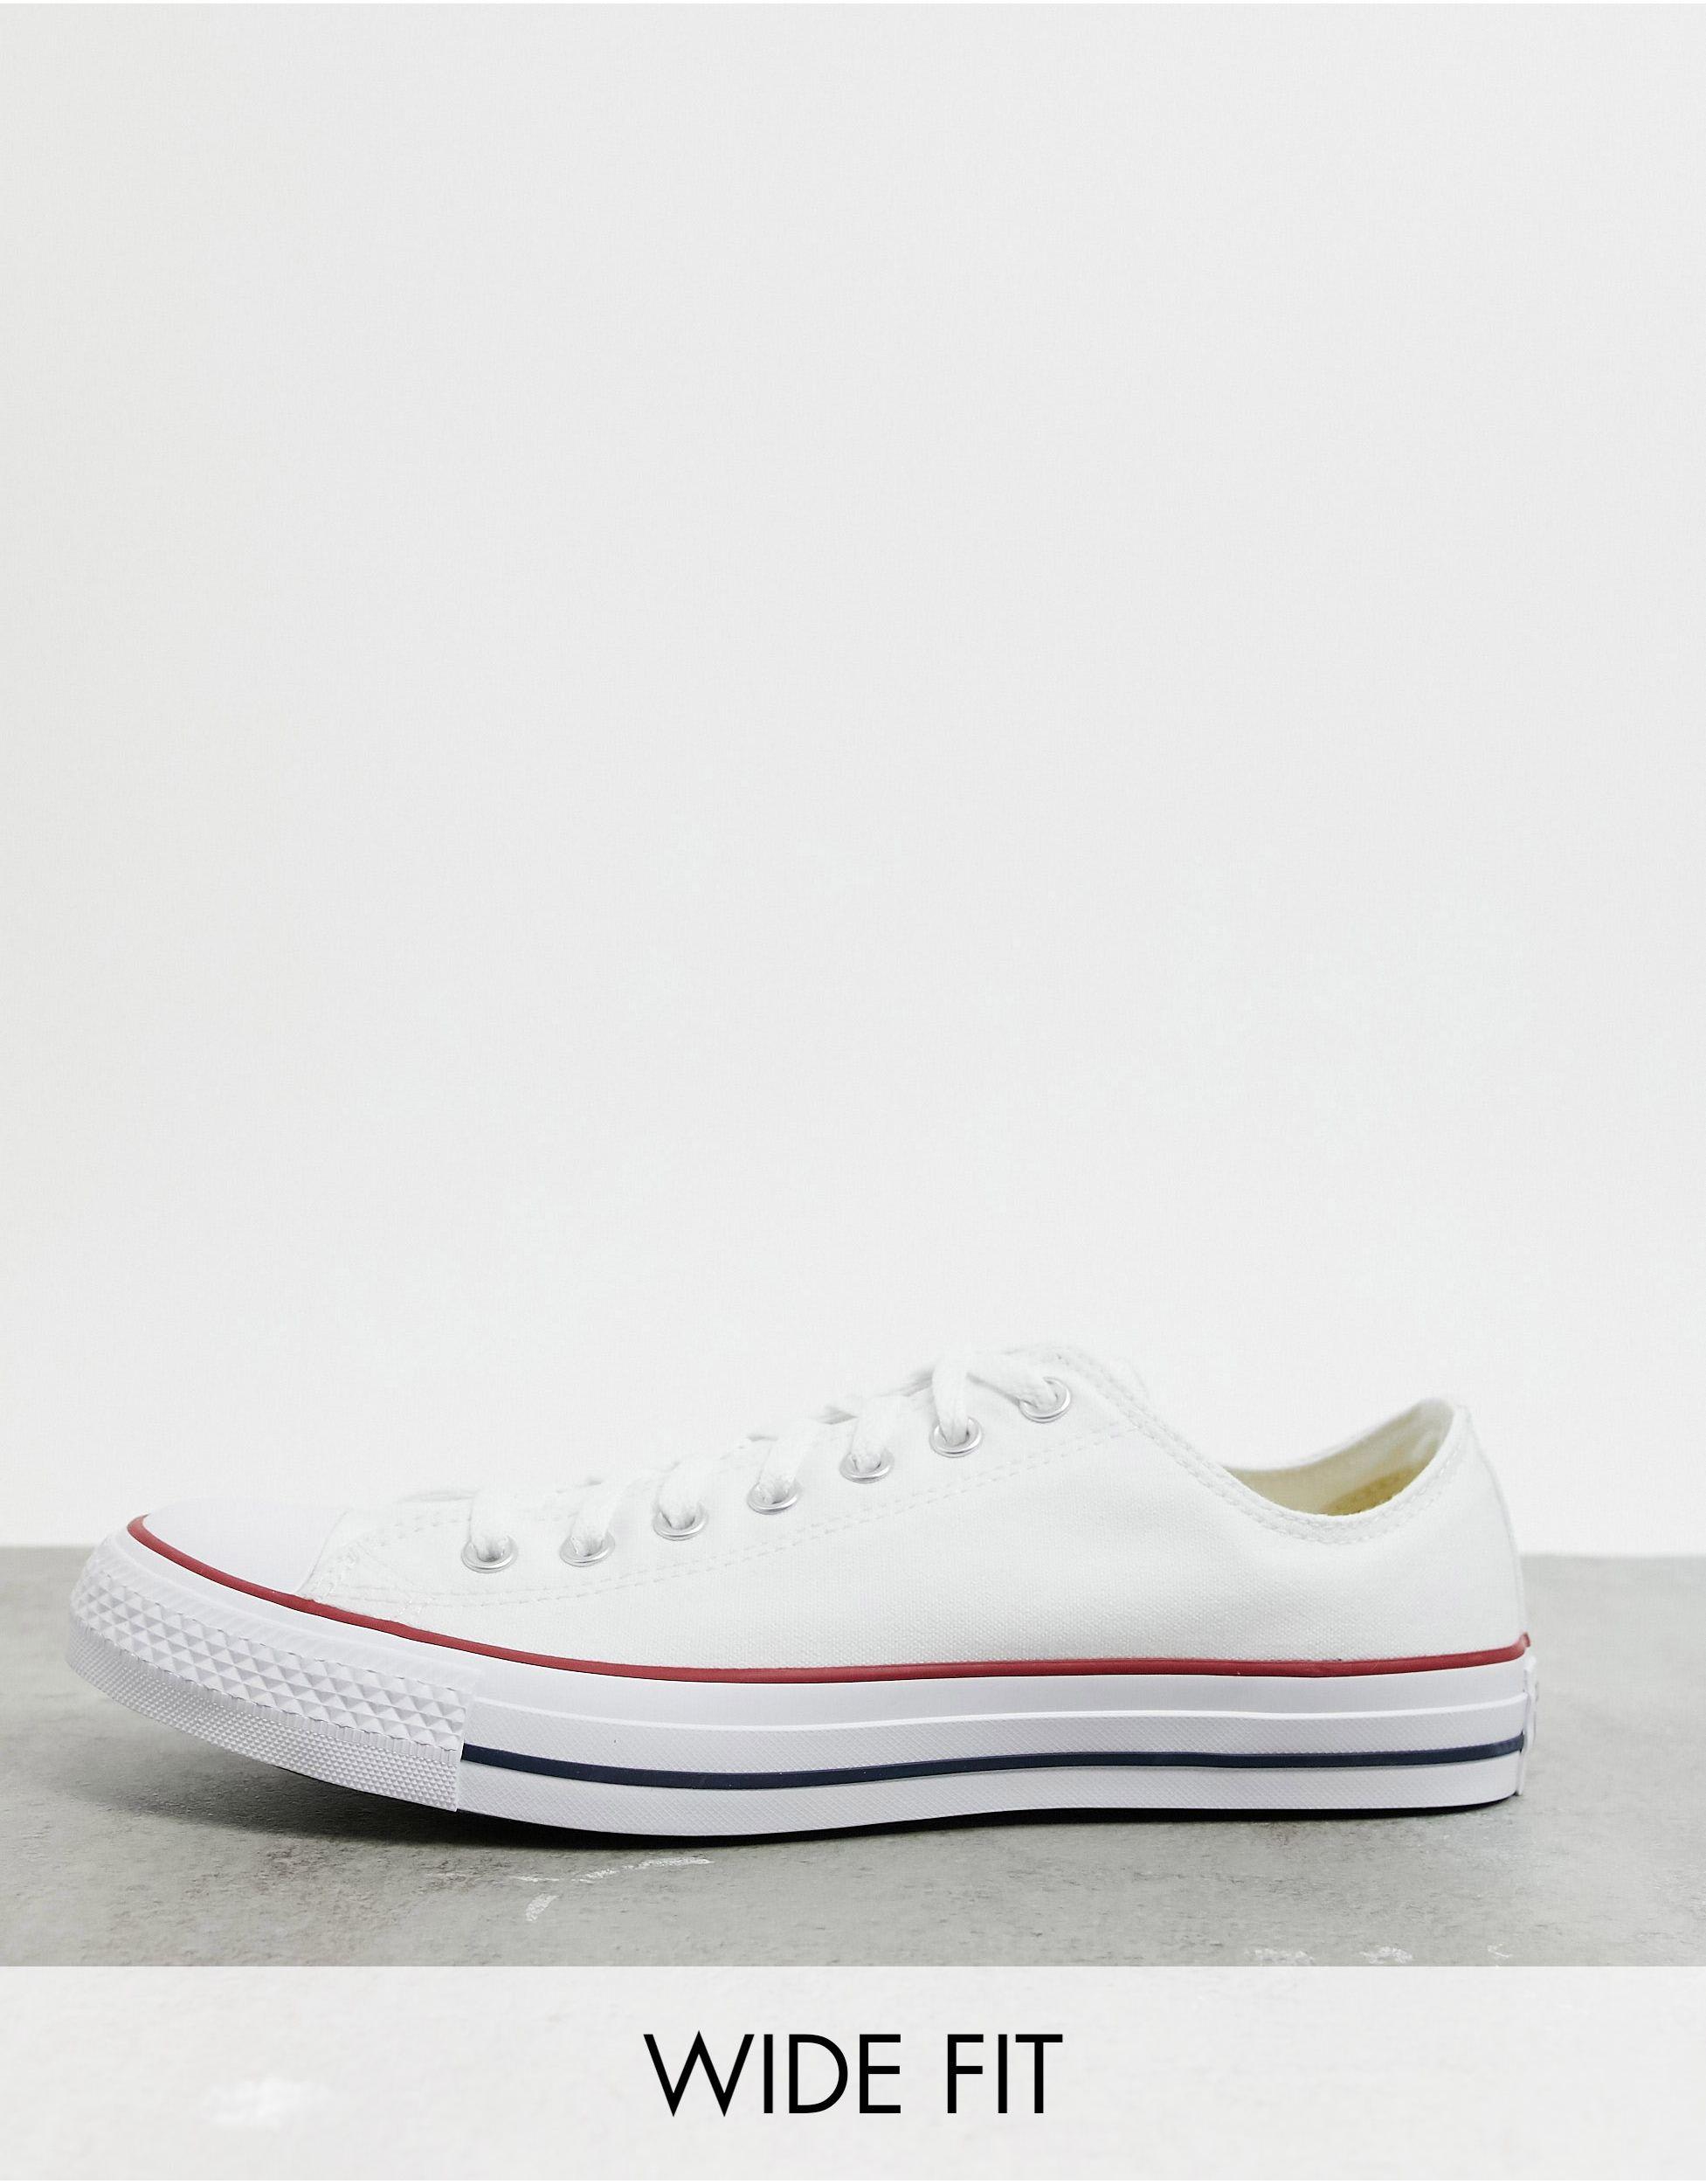 Converse Chuck Taylor All Star Ox Wide Fit Trainers in White | Lyst  Australia